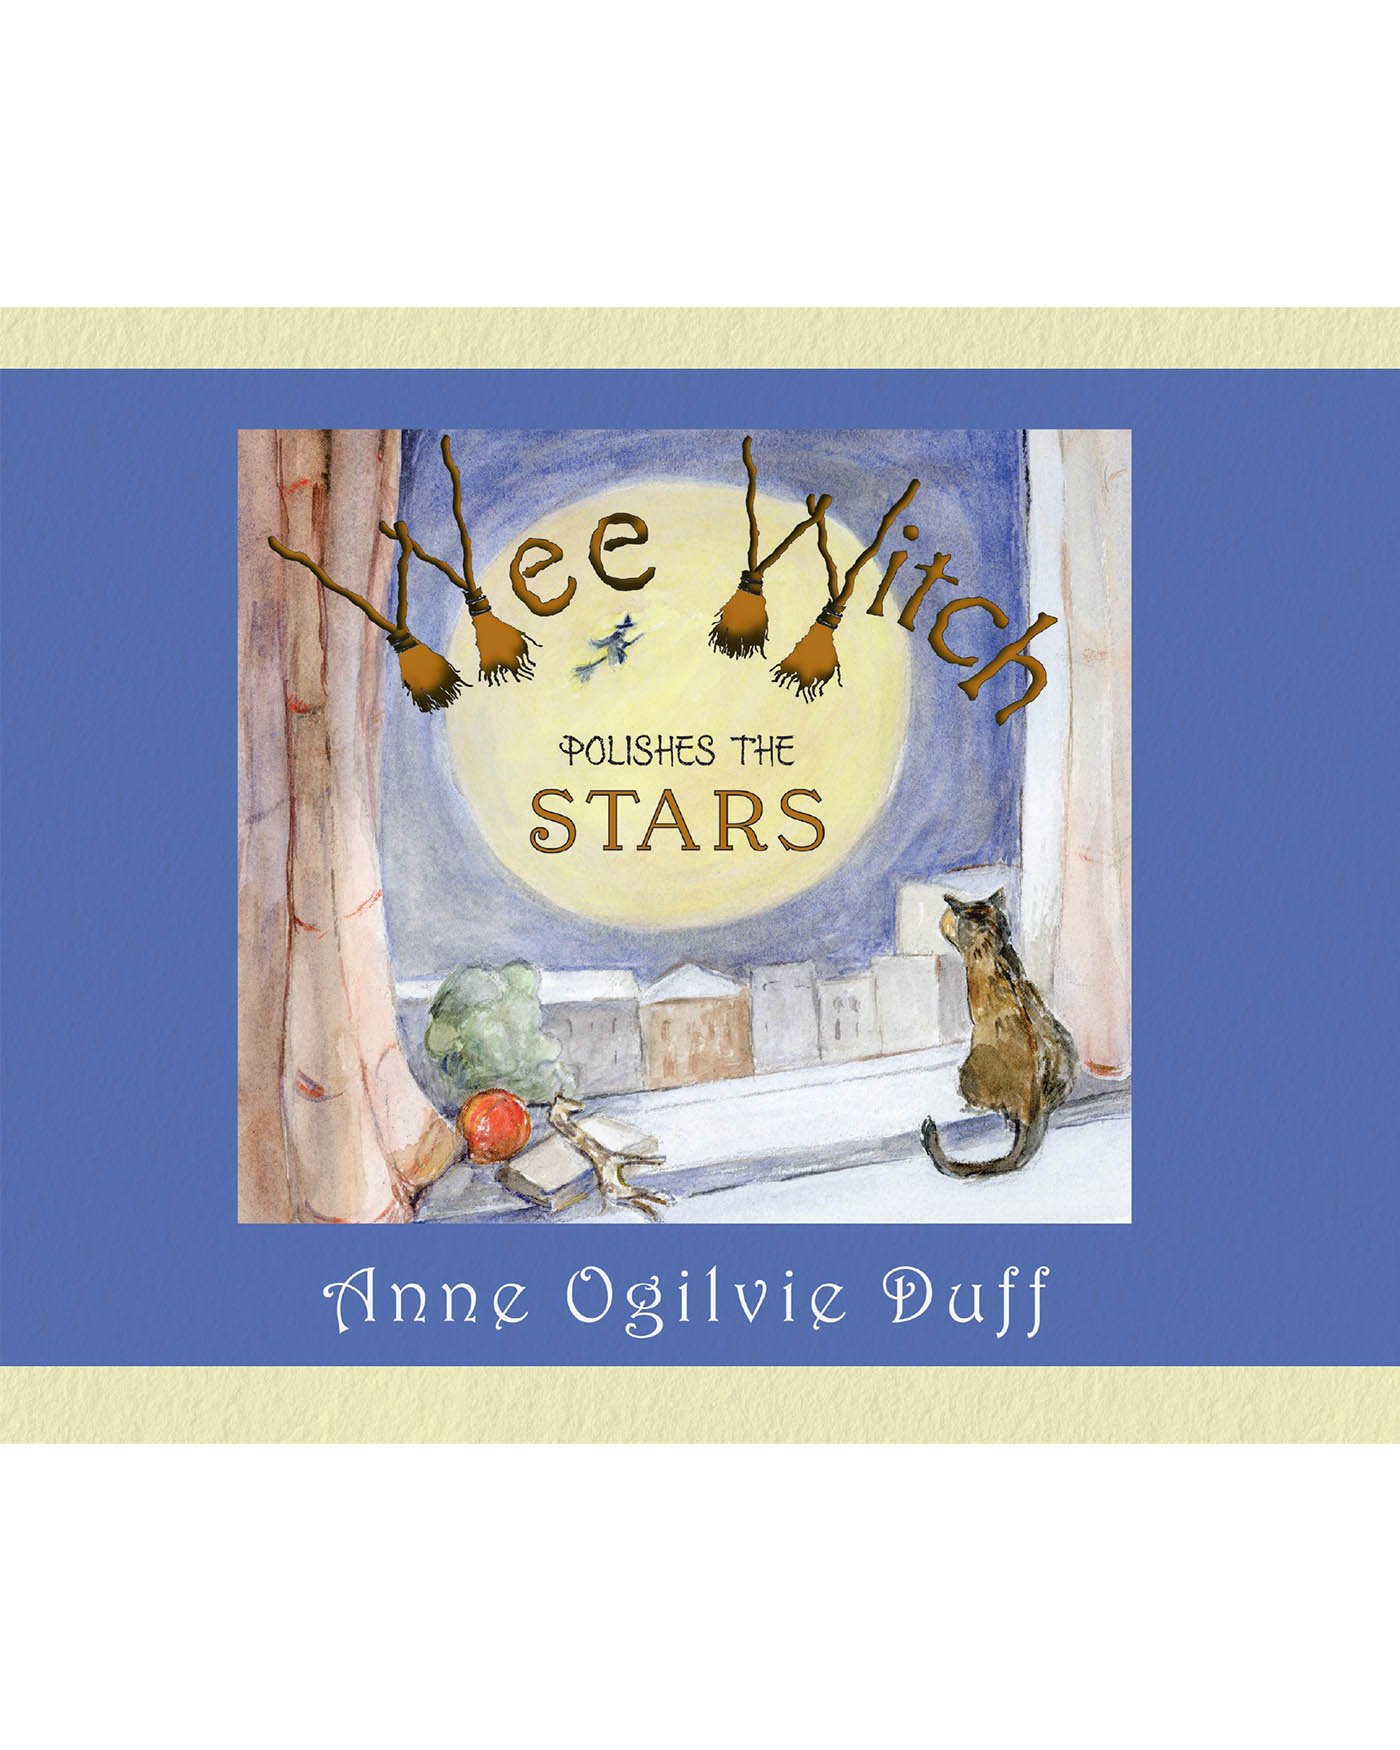 Wee Witch Polishes the Stars Cover Image